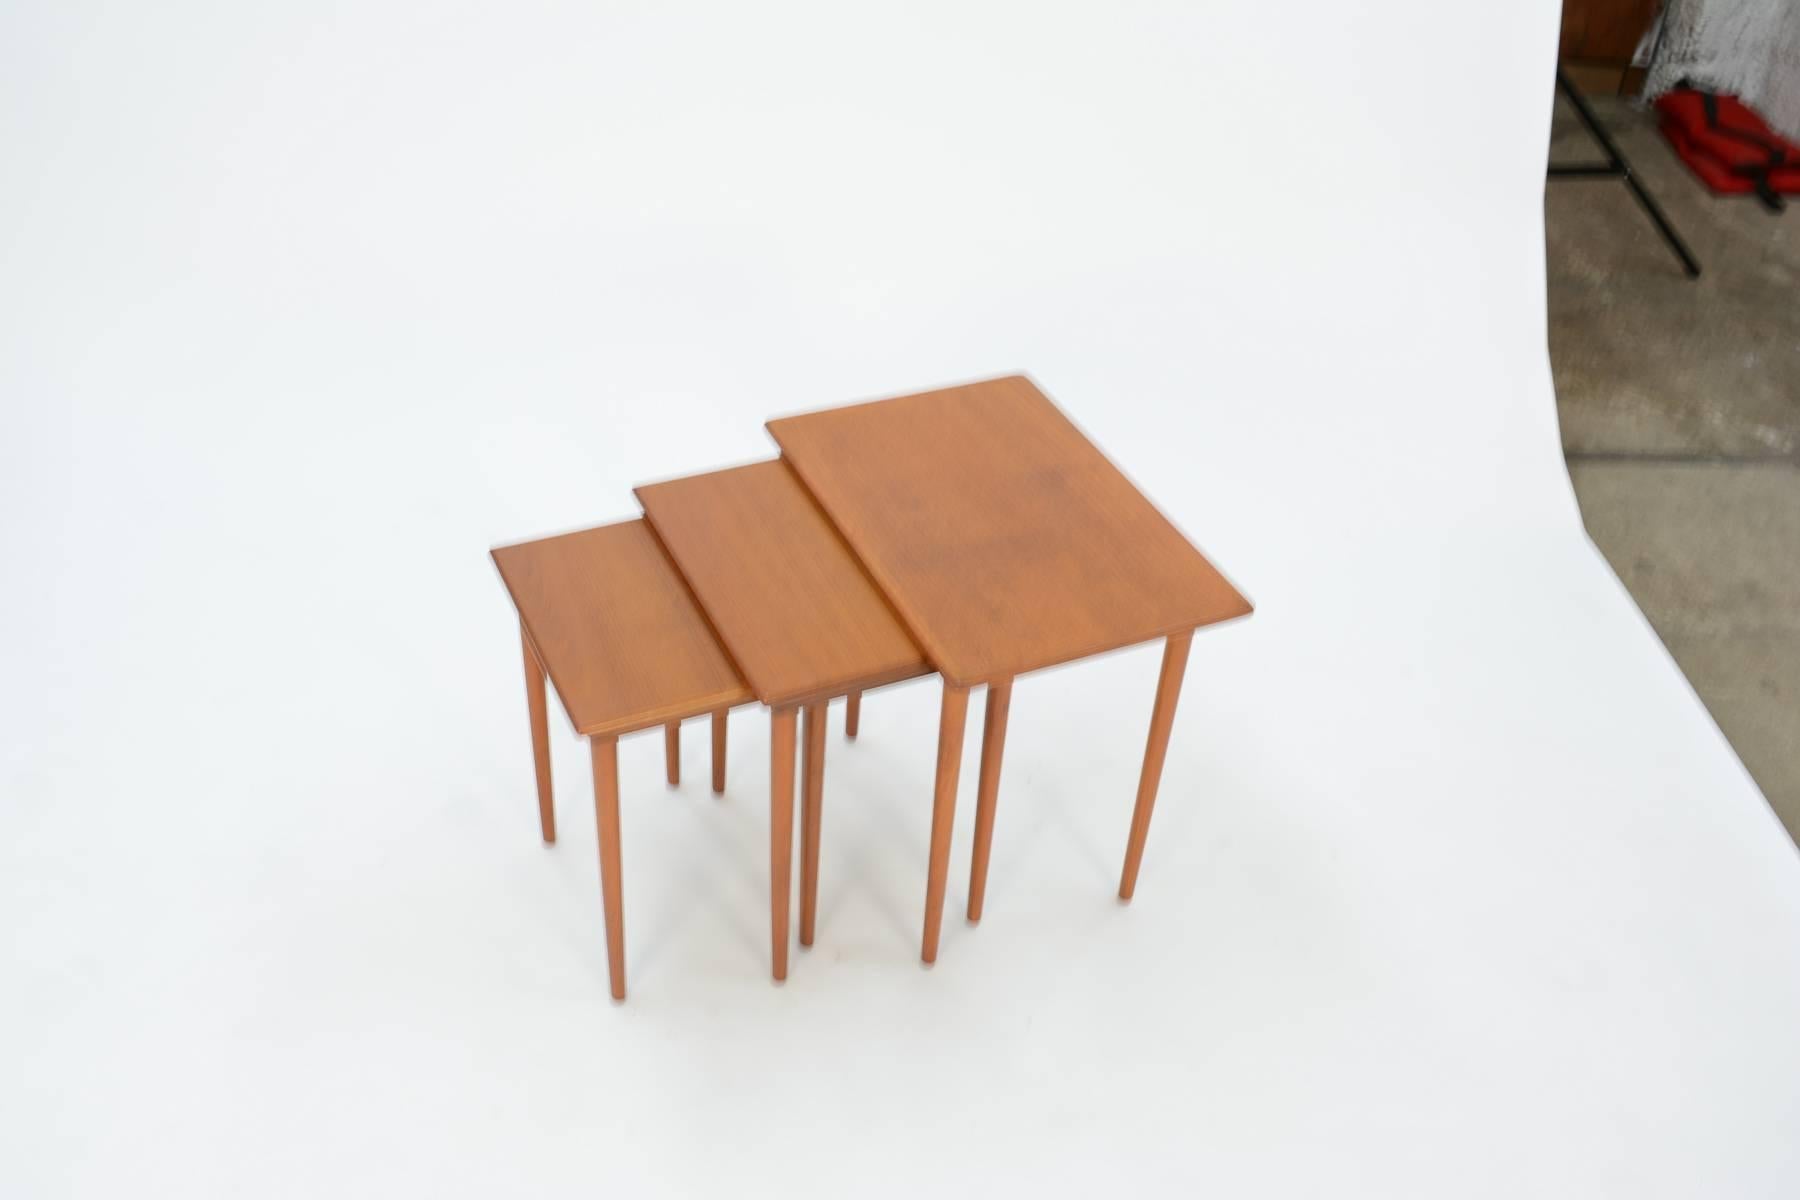 This trio of neatly nesting Danish Mid-Century teak side tables will maximize your space while elevating your style. Their timeless clean-lined design also means they'll blend with a variety of decor styles and provide extra cocktail tables for